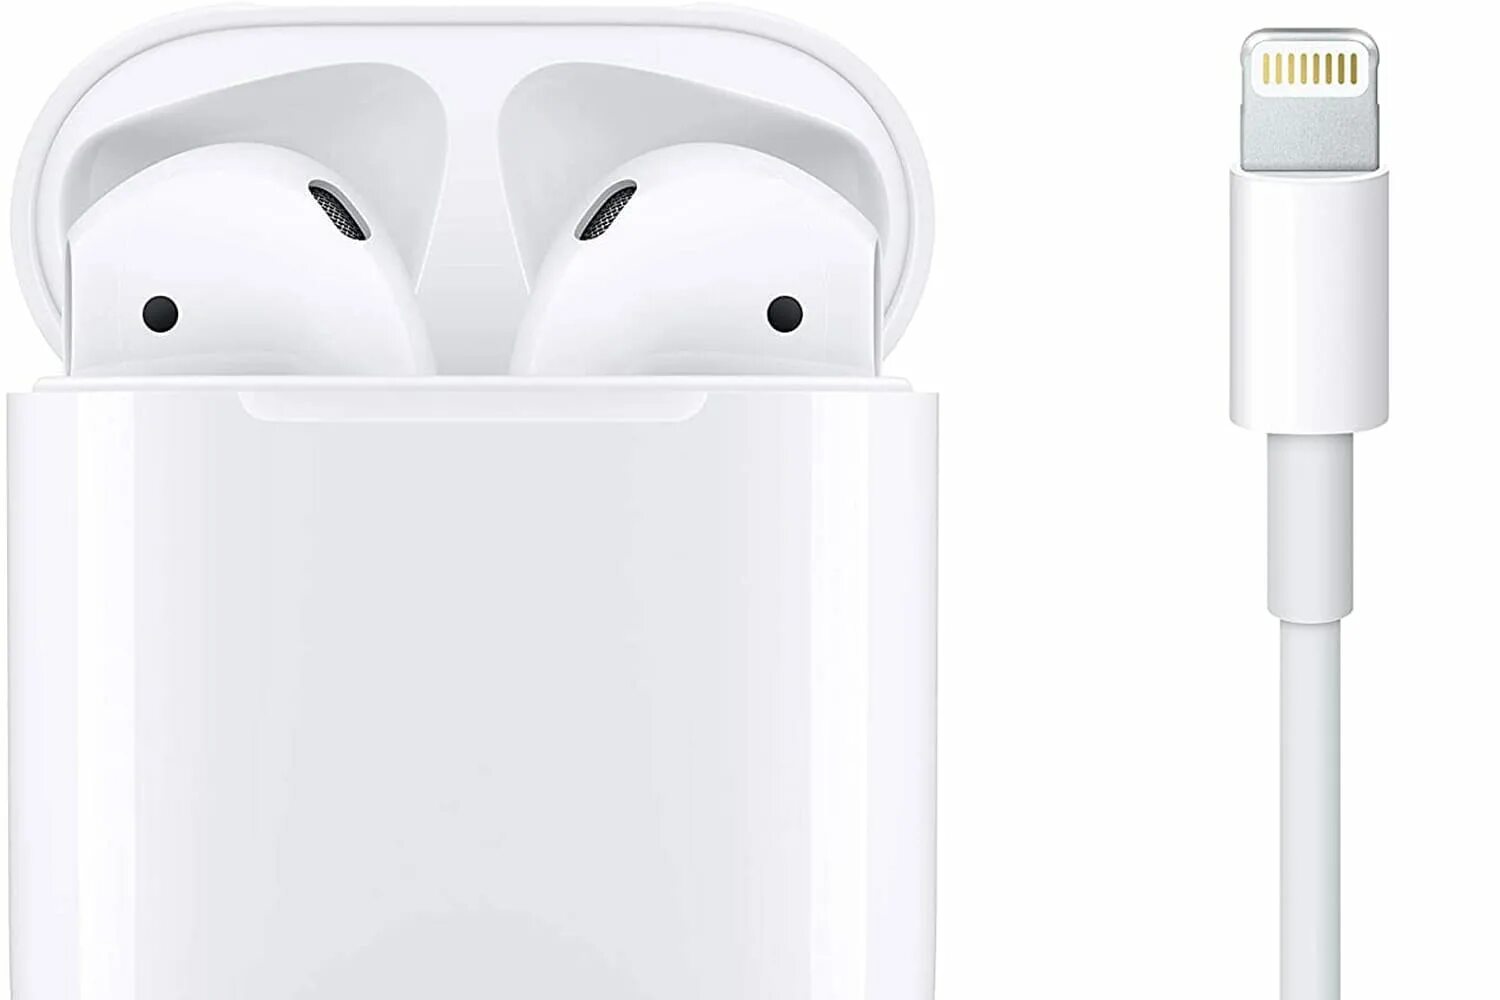 Iphone airpods 1. Apple AIRPODS 1. Наушники Apple аирподс про 2. Apple AIRPODS 2.1. Наушники аирподс 1.